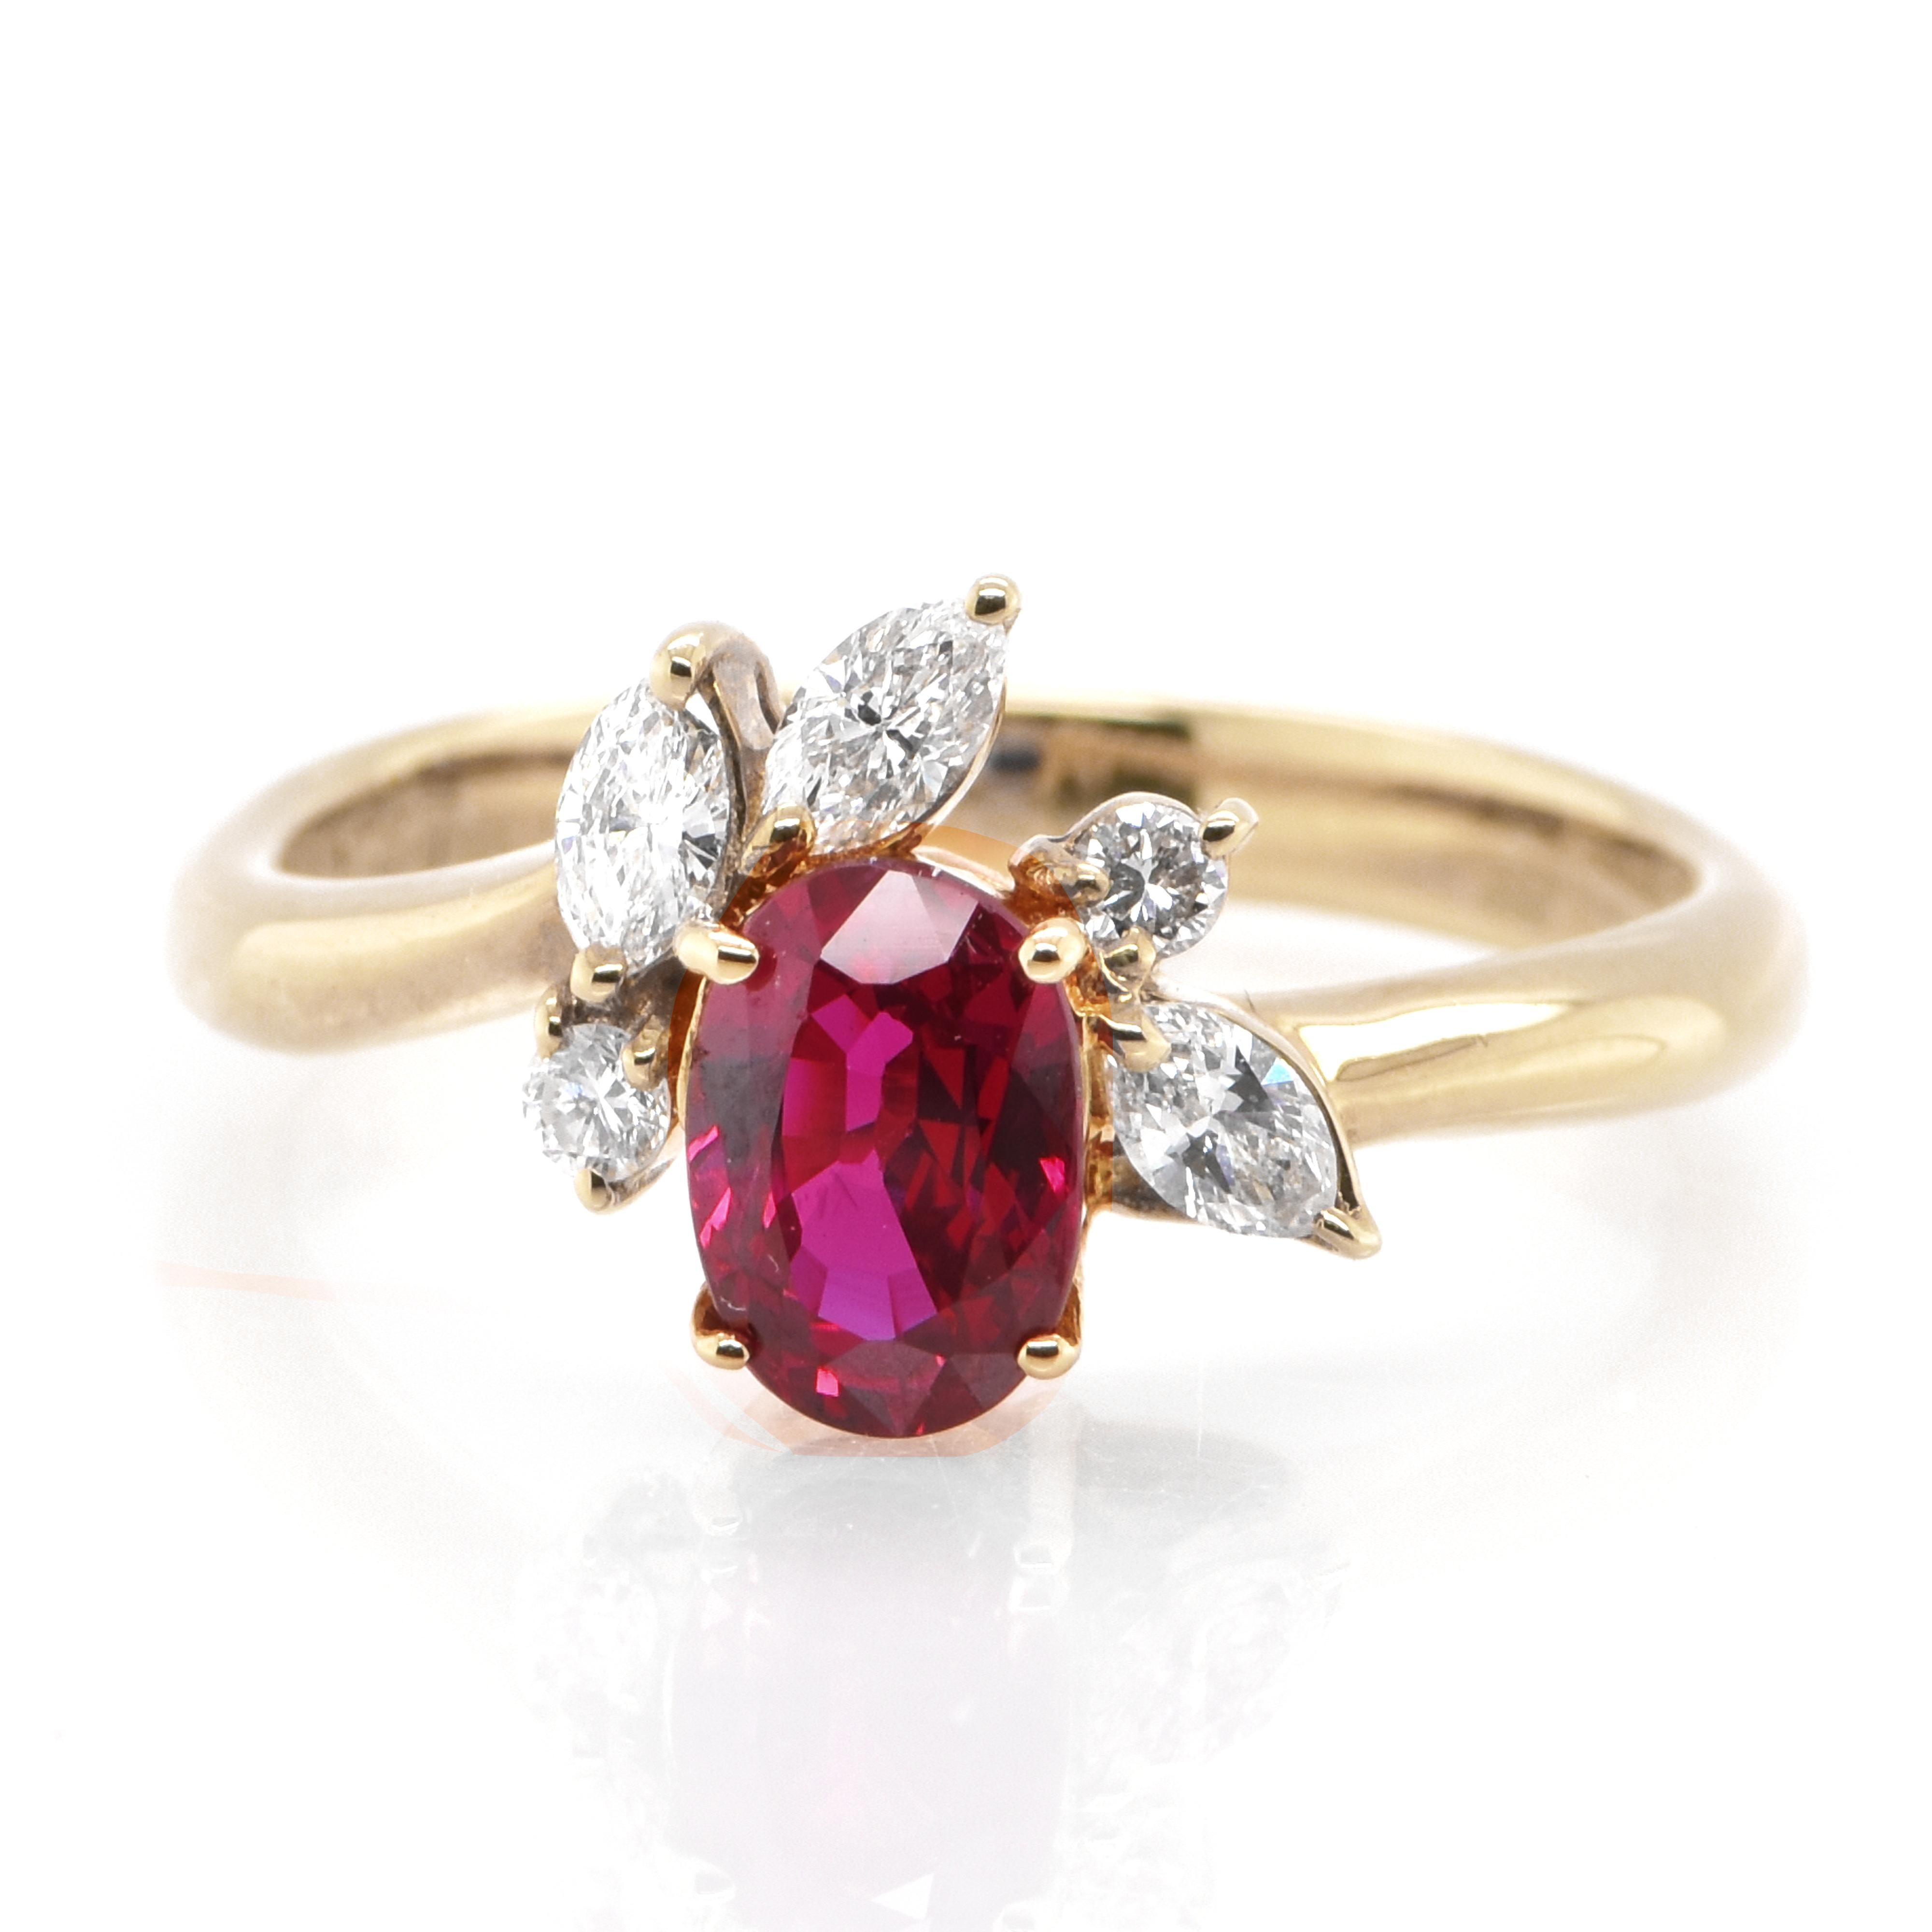 A beautiful ring set in Gold featuring a 1.069 Carat Natural Ruby and 0.27 Carat Diamonds. Rubies are referred to as 